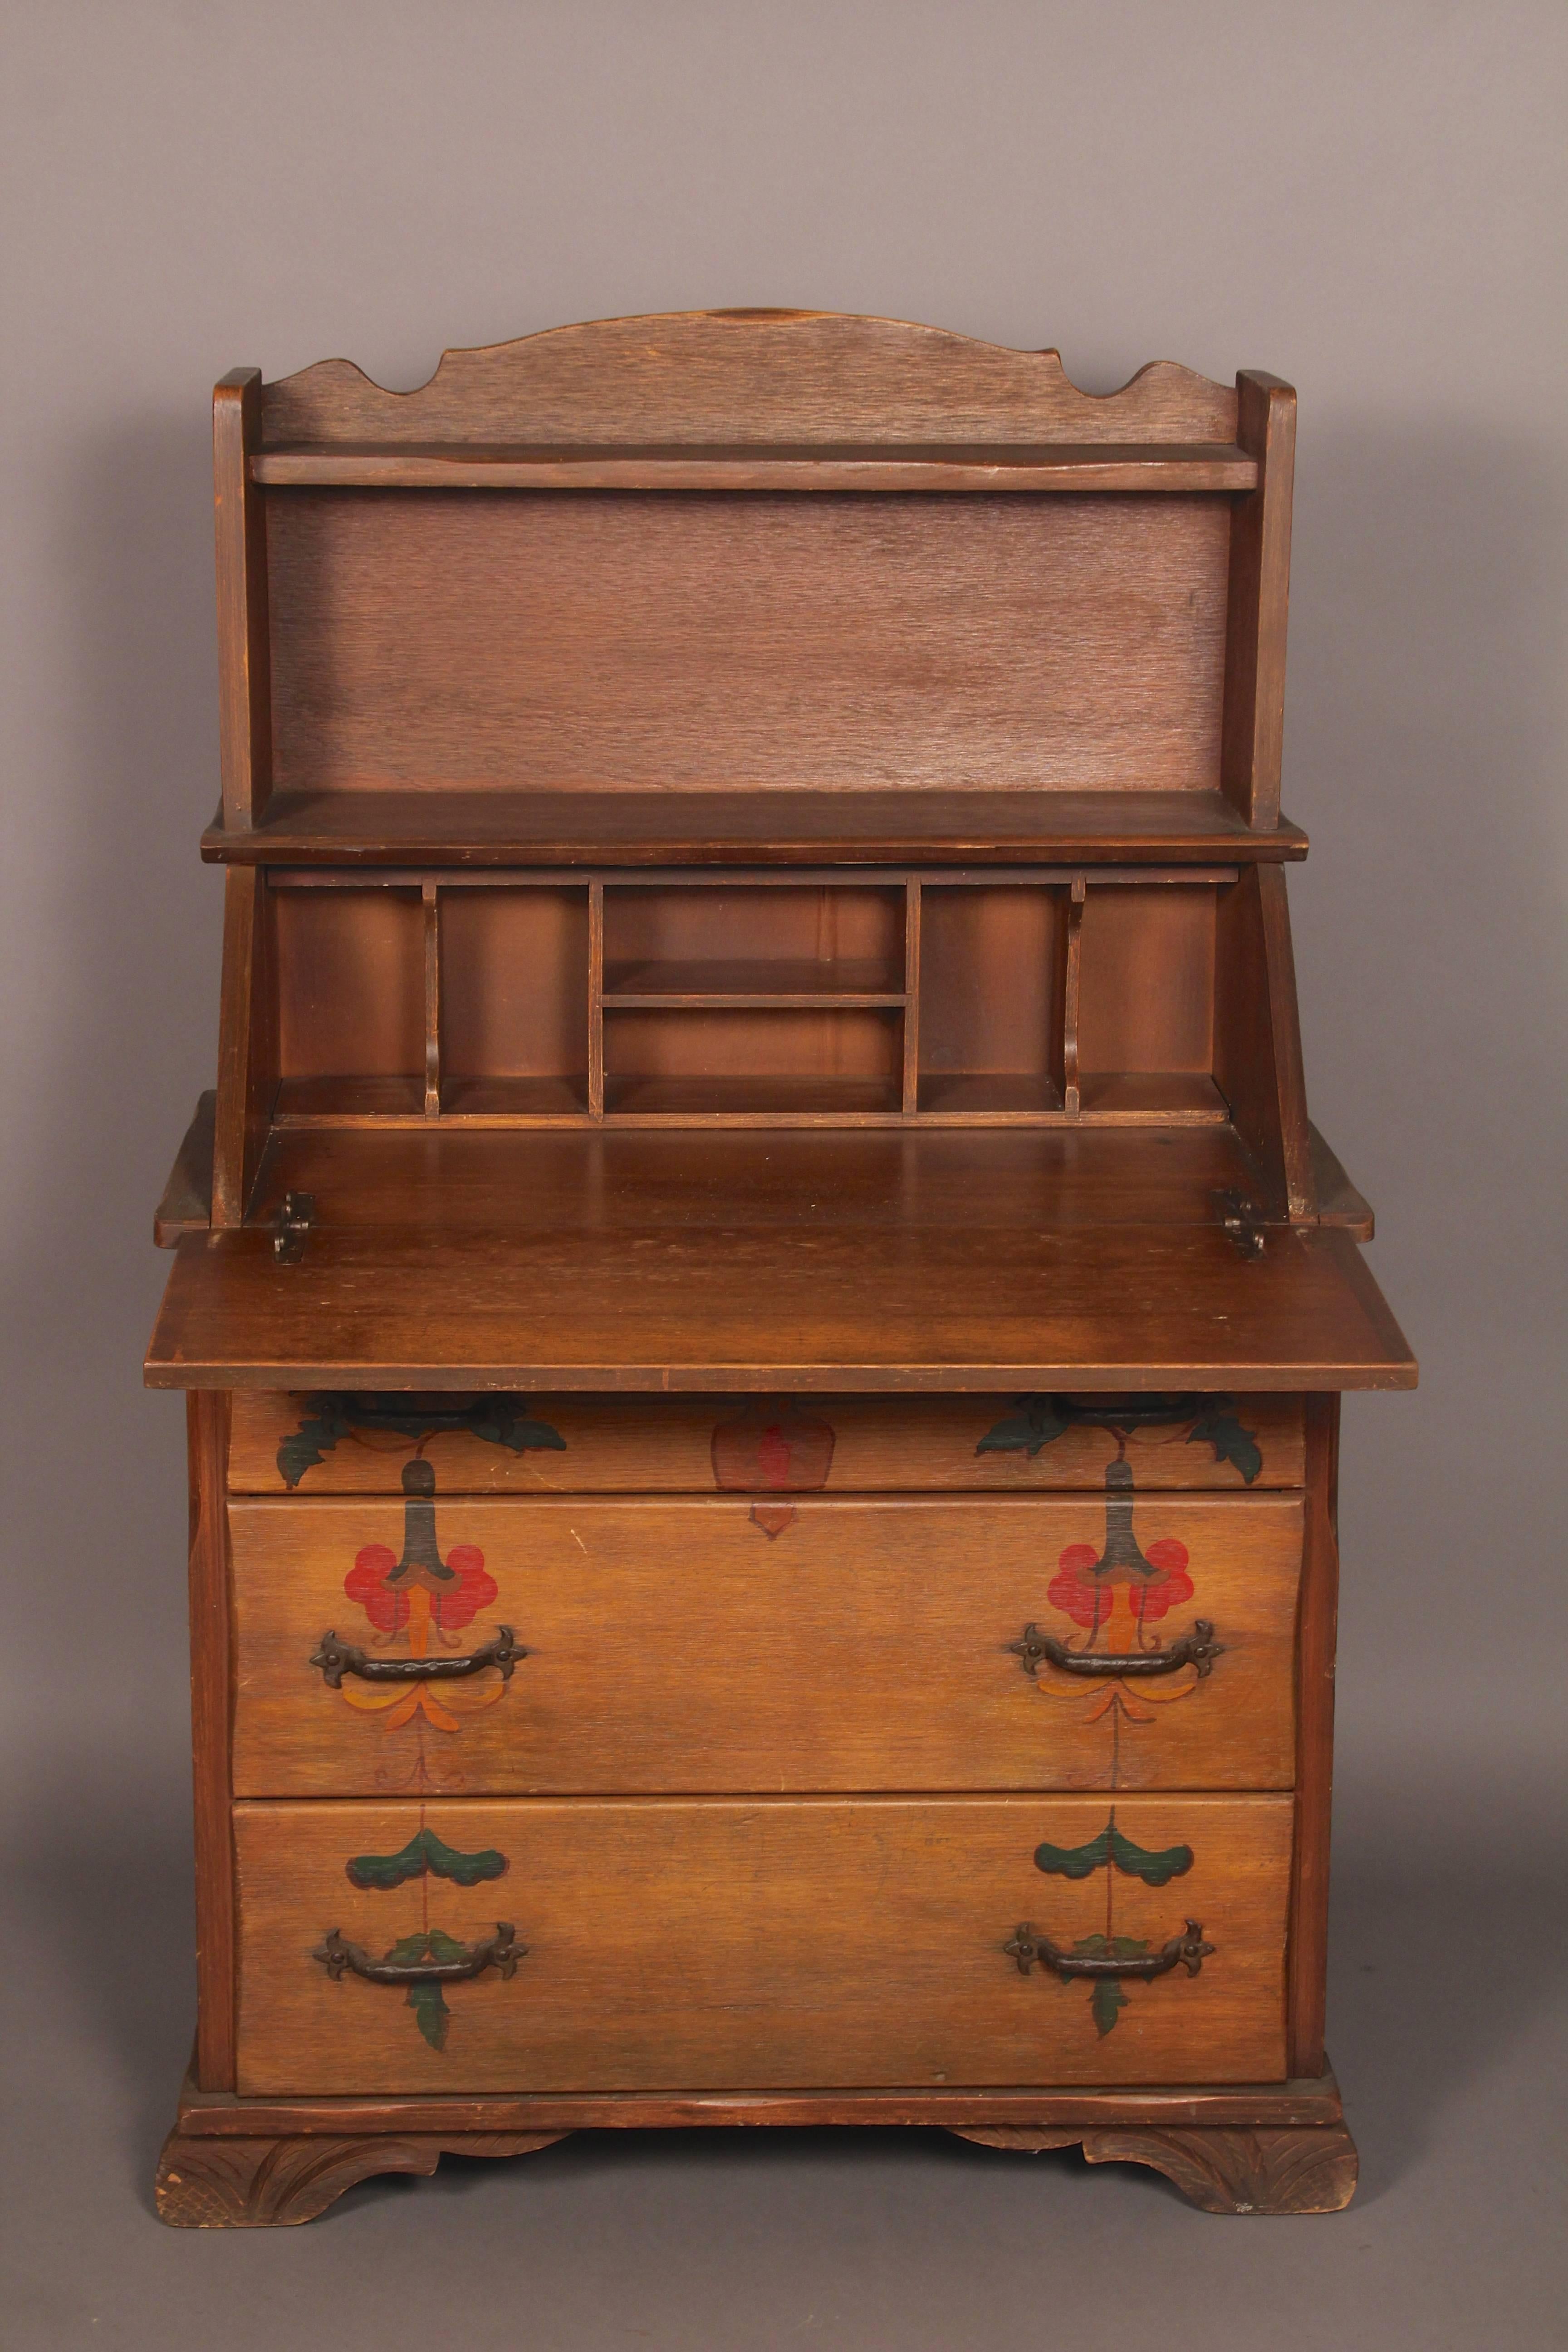 Rancho Monterey Period Secretary Desk with Three Drawers In Good Condition For Sale In Pasadena, CA